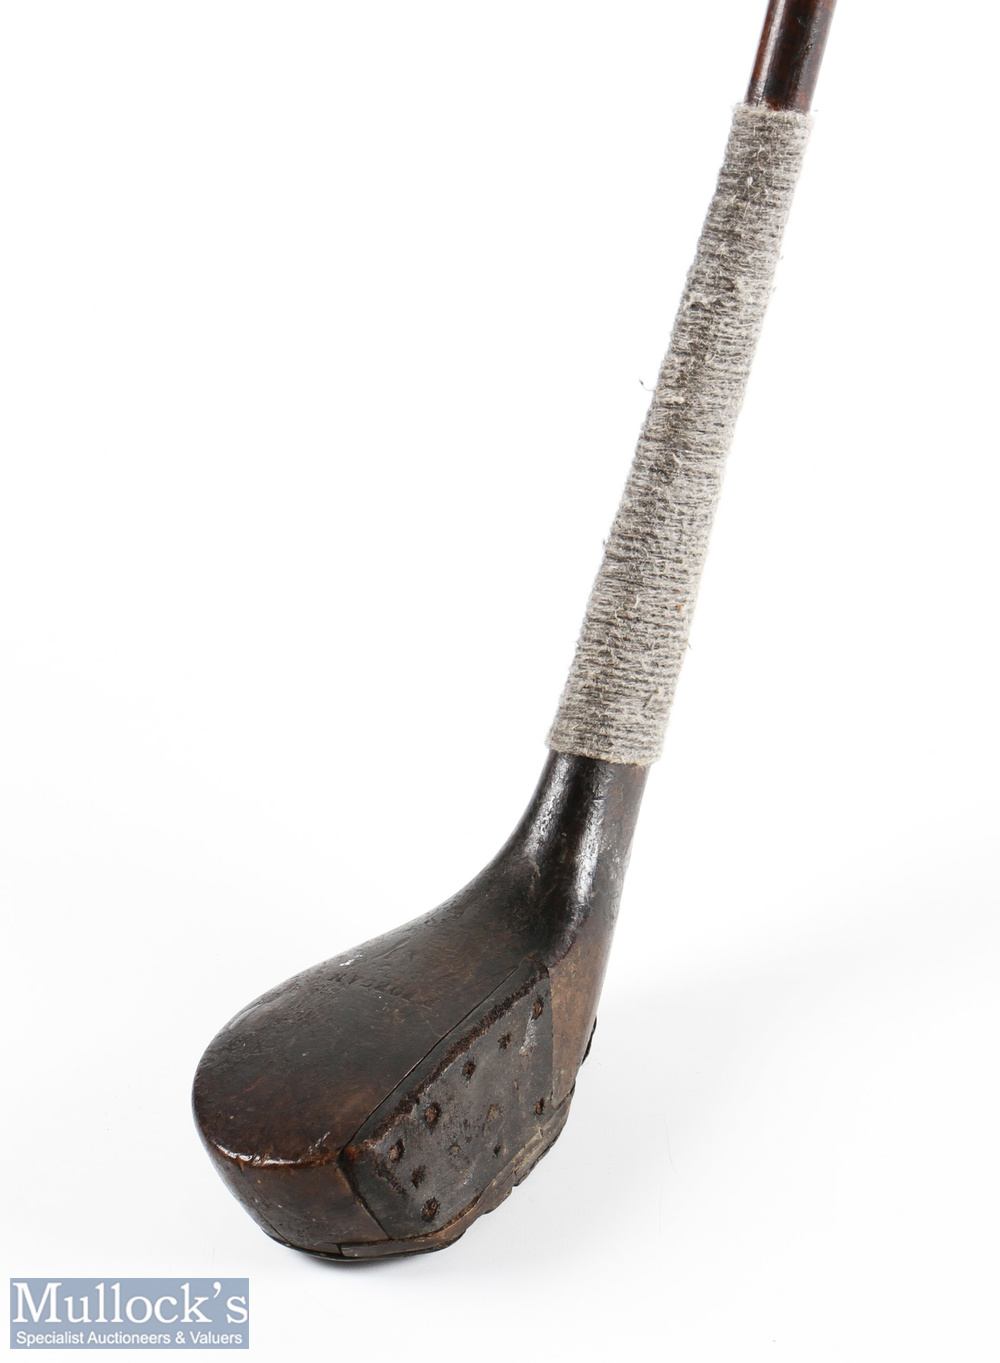 R Forgan St Andrews POWF transitional scare neck brassie with full brass wrap over sole plate and - Image 2 of 3